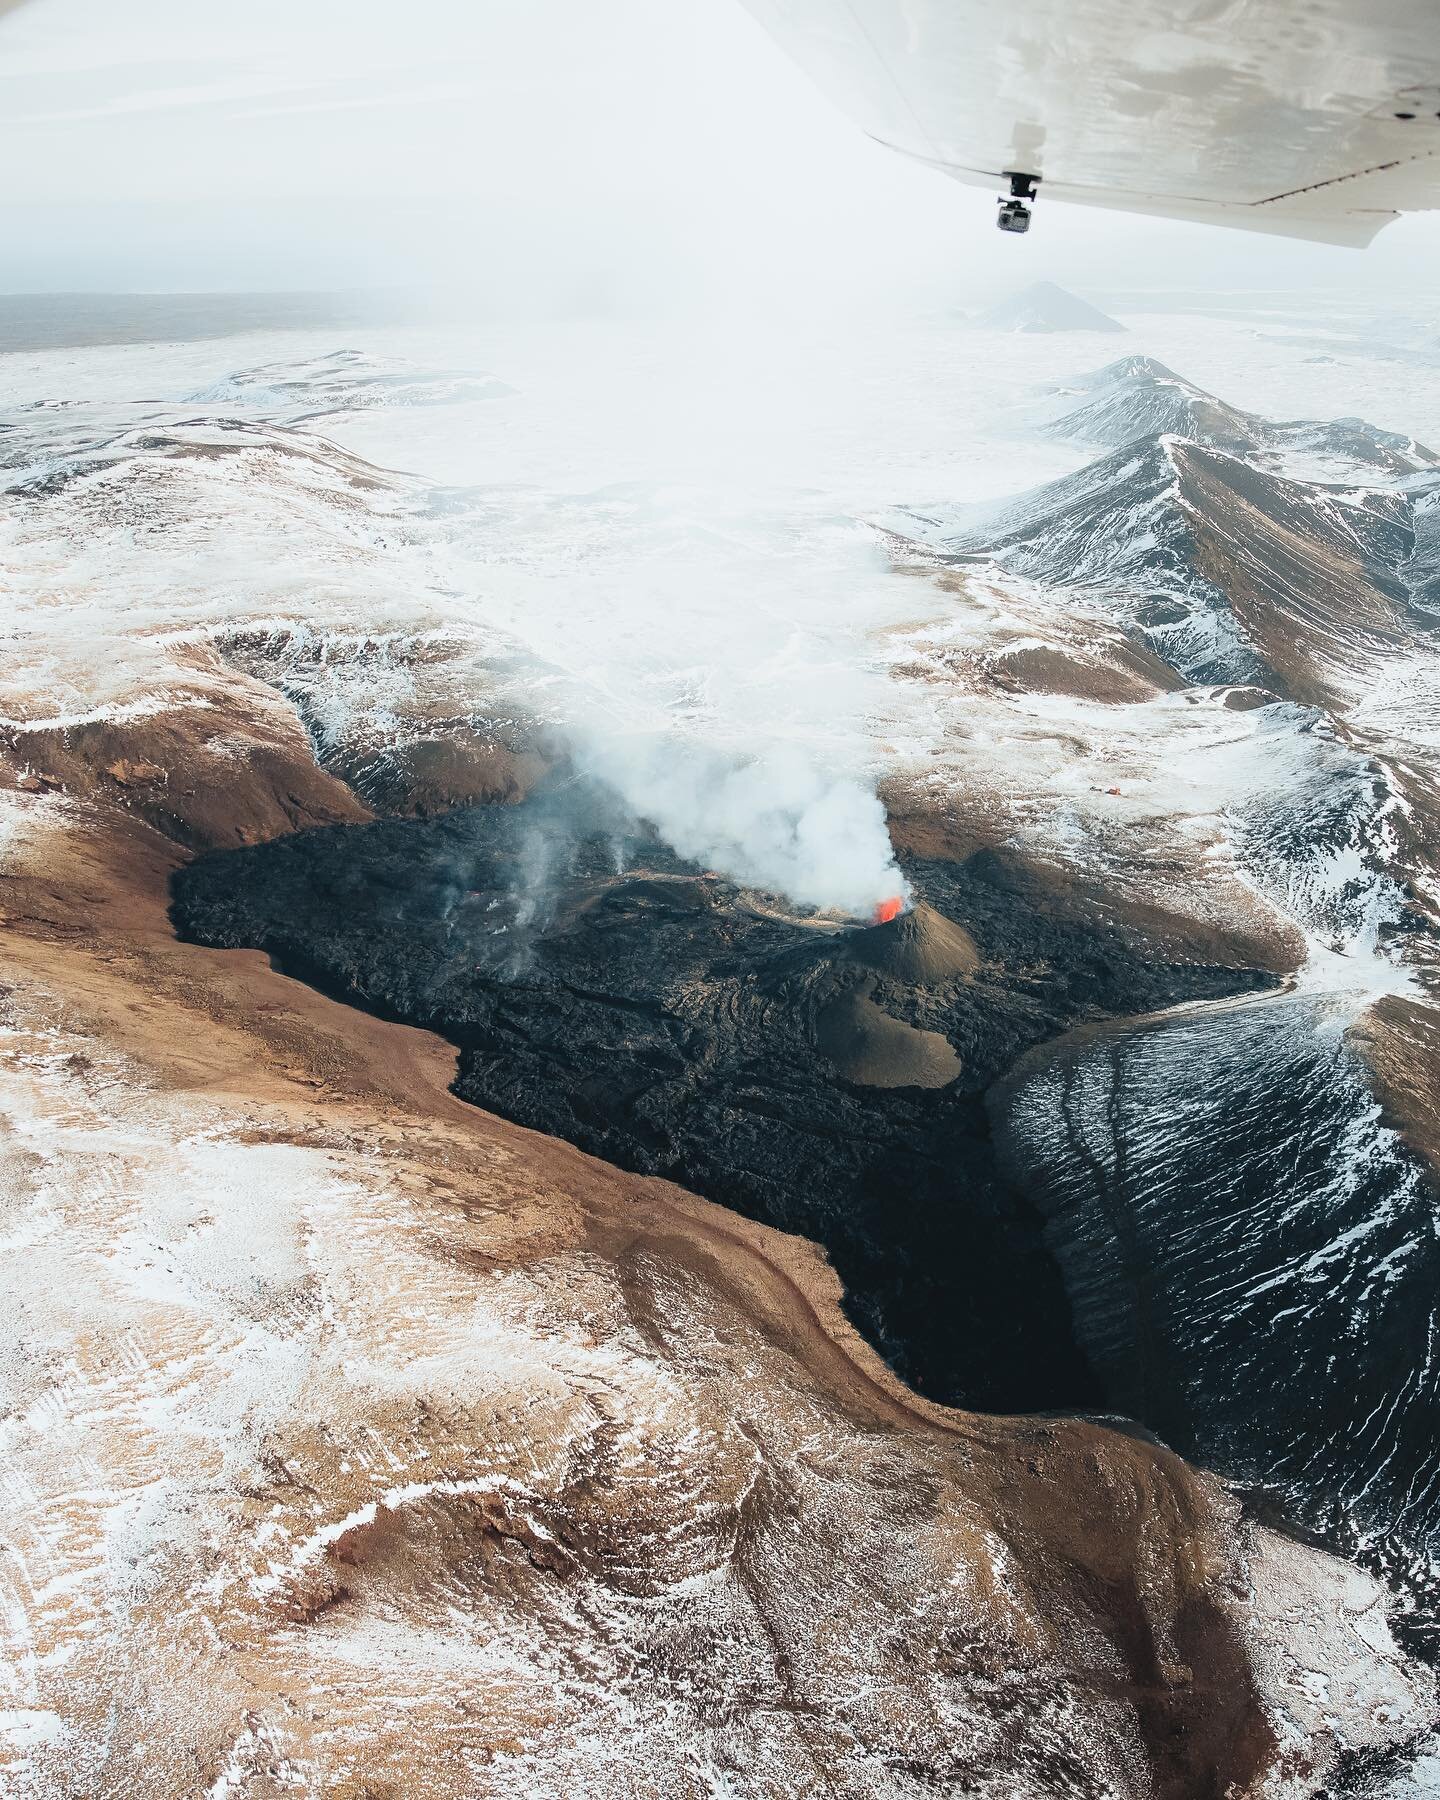 Flying over a volcano. These shots were taken from a plane early this morning. It's incredible to see how much of the valley has actually been filled with lava by now. It's not long since you could stand right next to the volcano which has now grown 